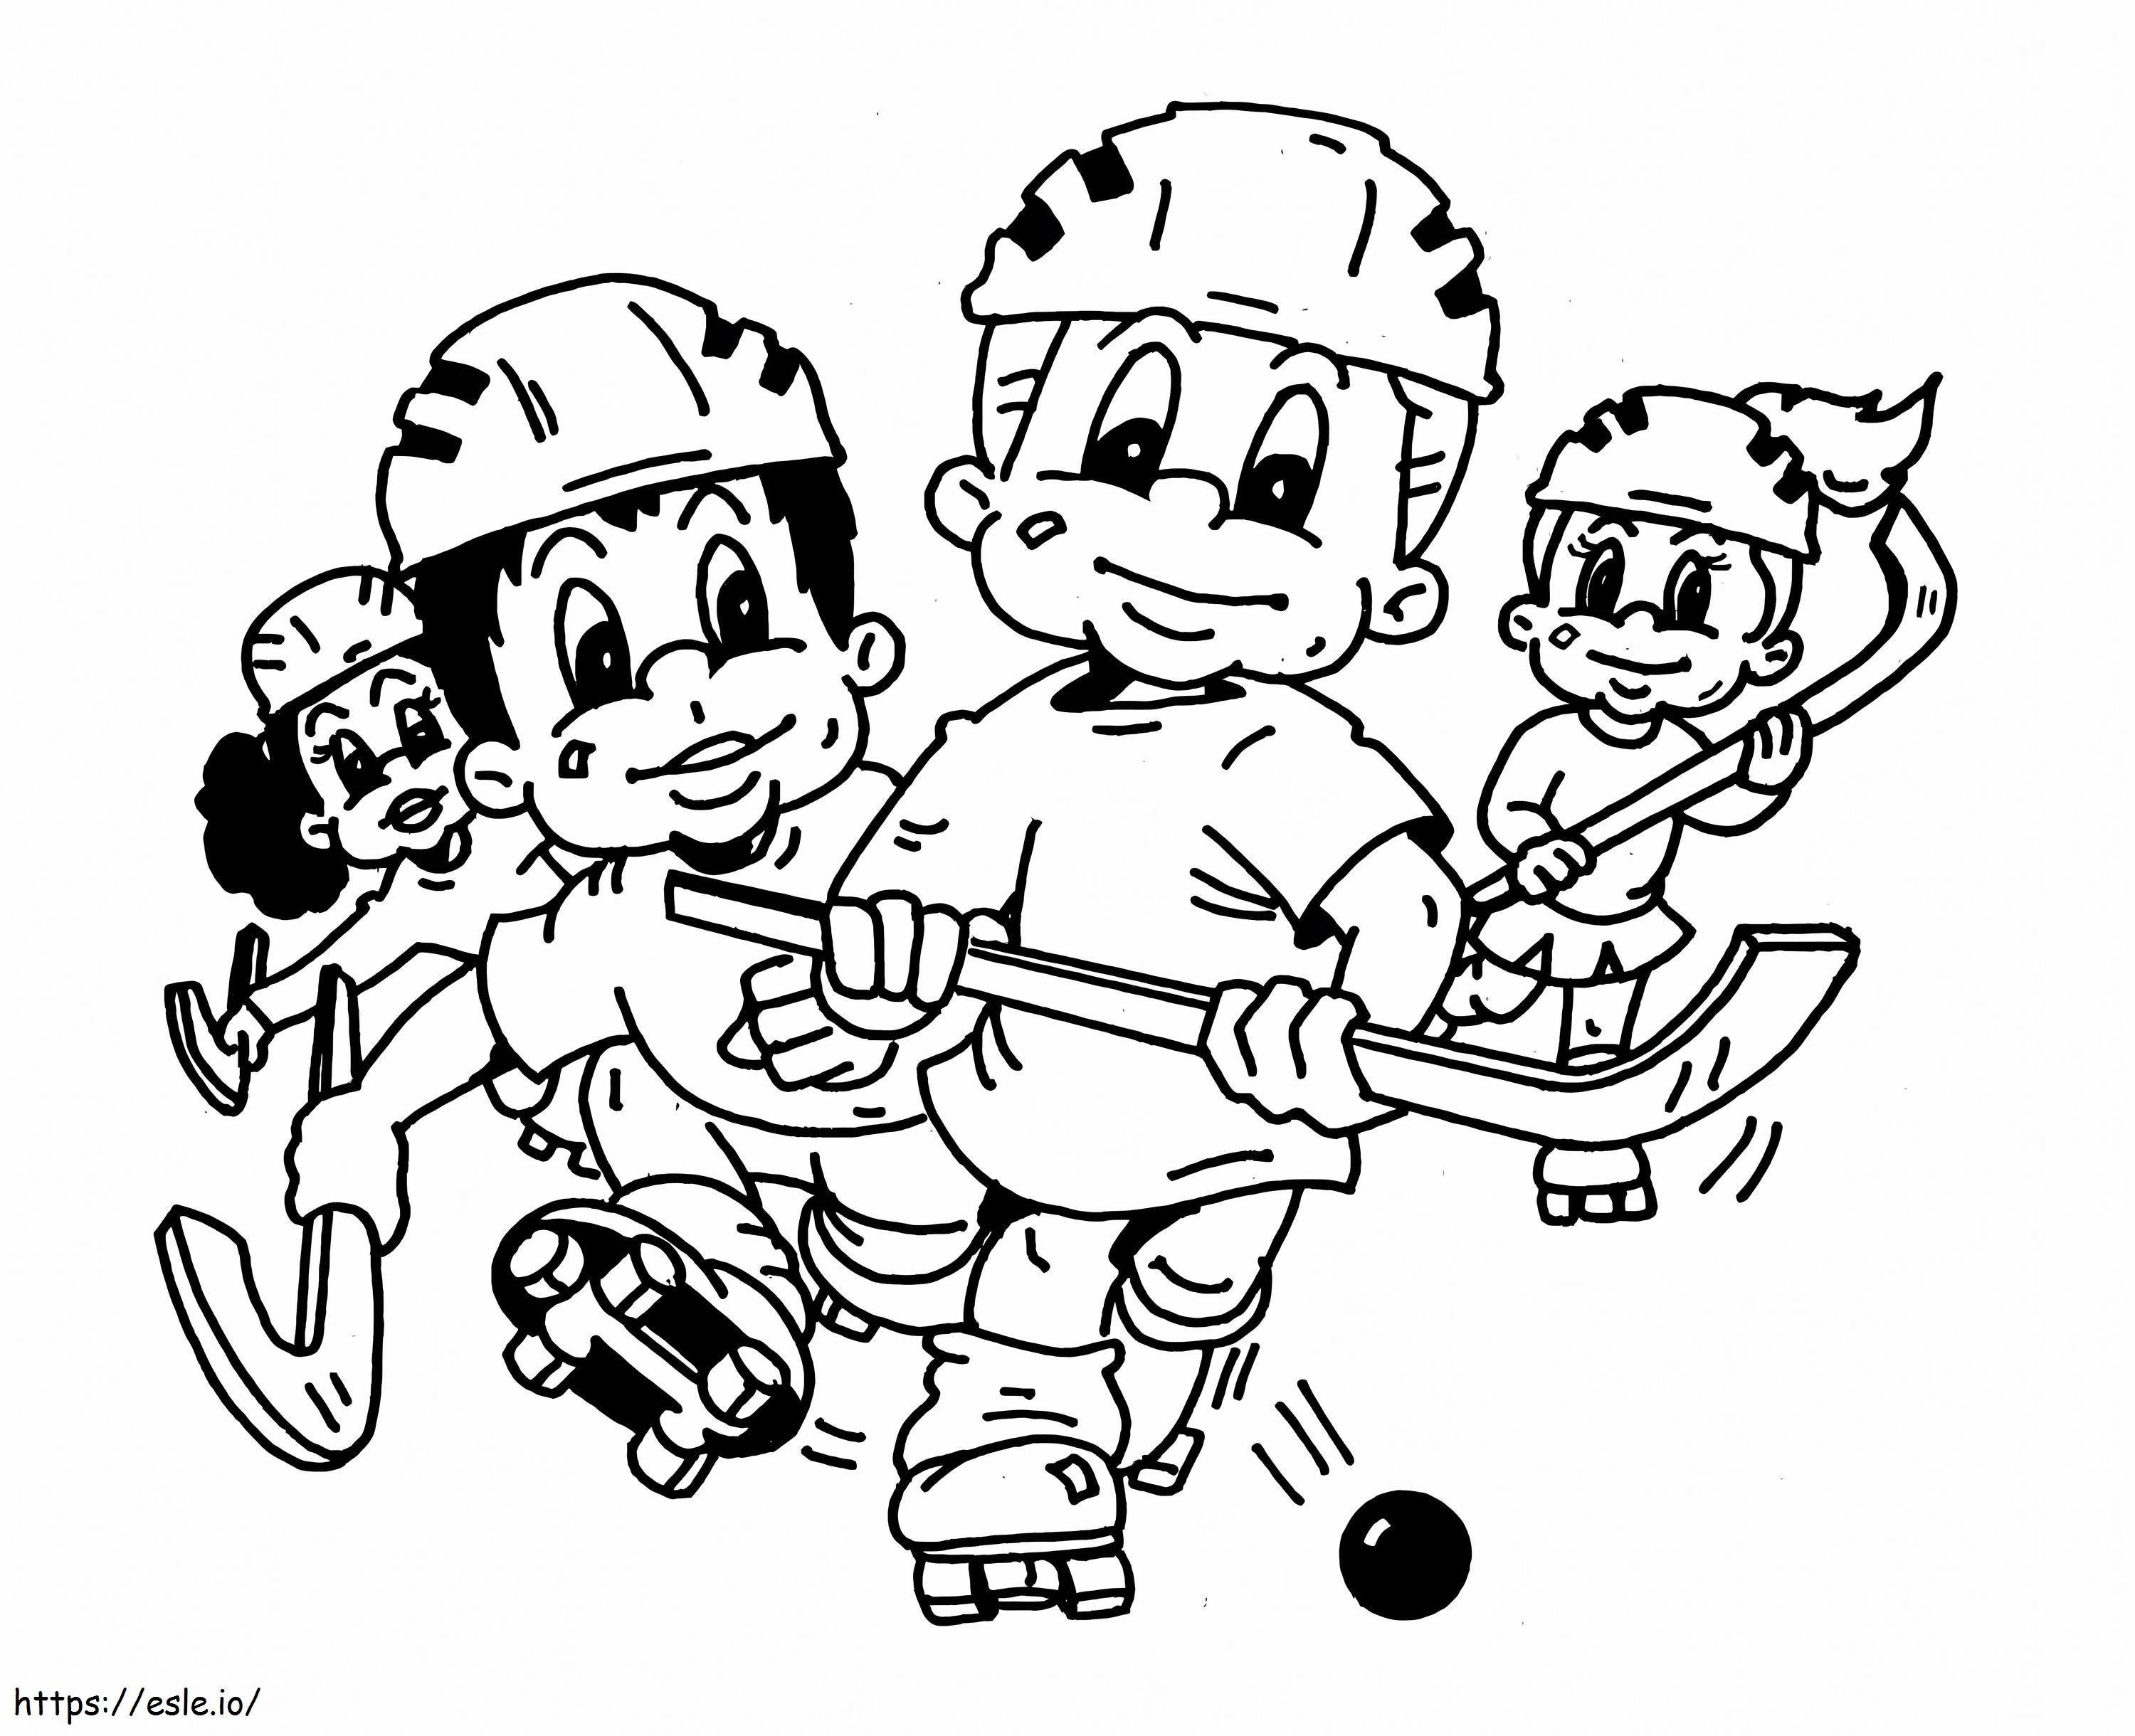 Four Children Playing Hockey coloring page